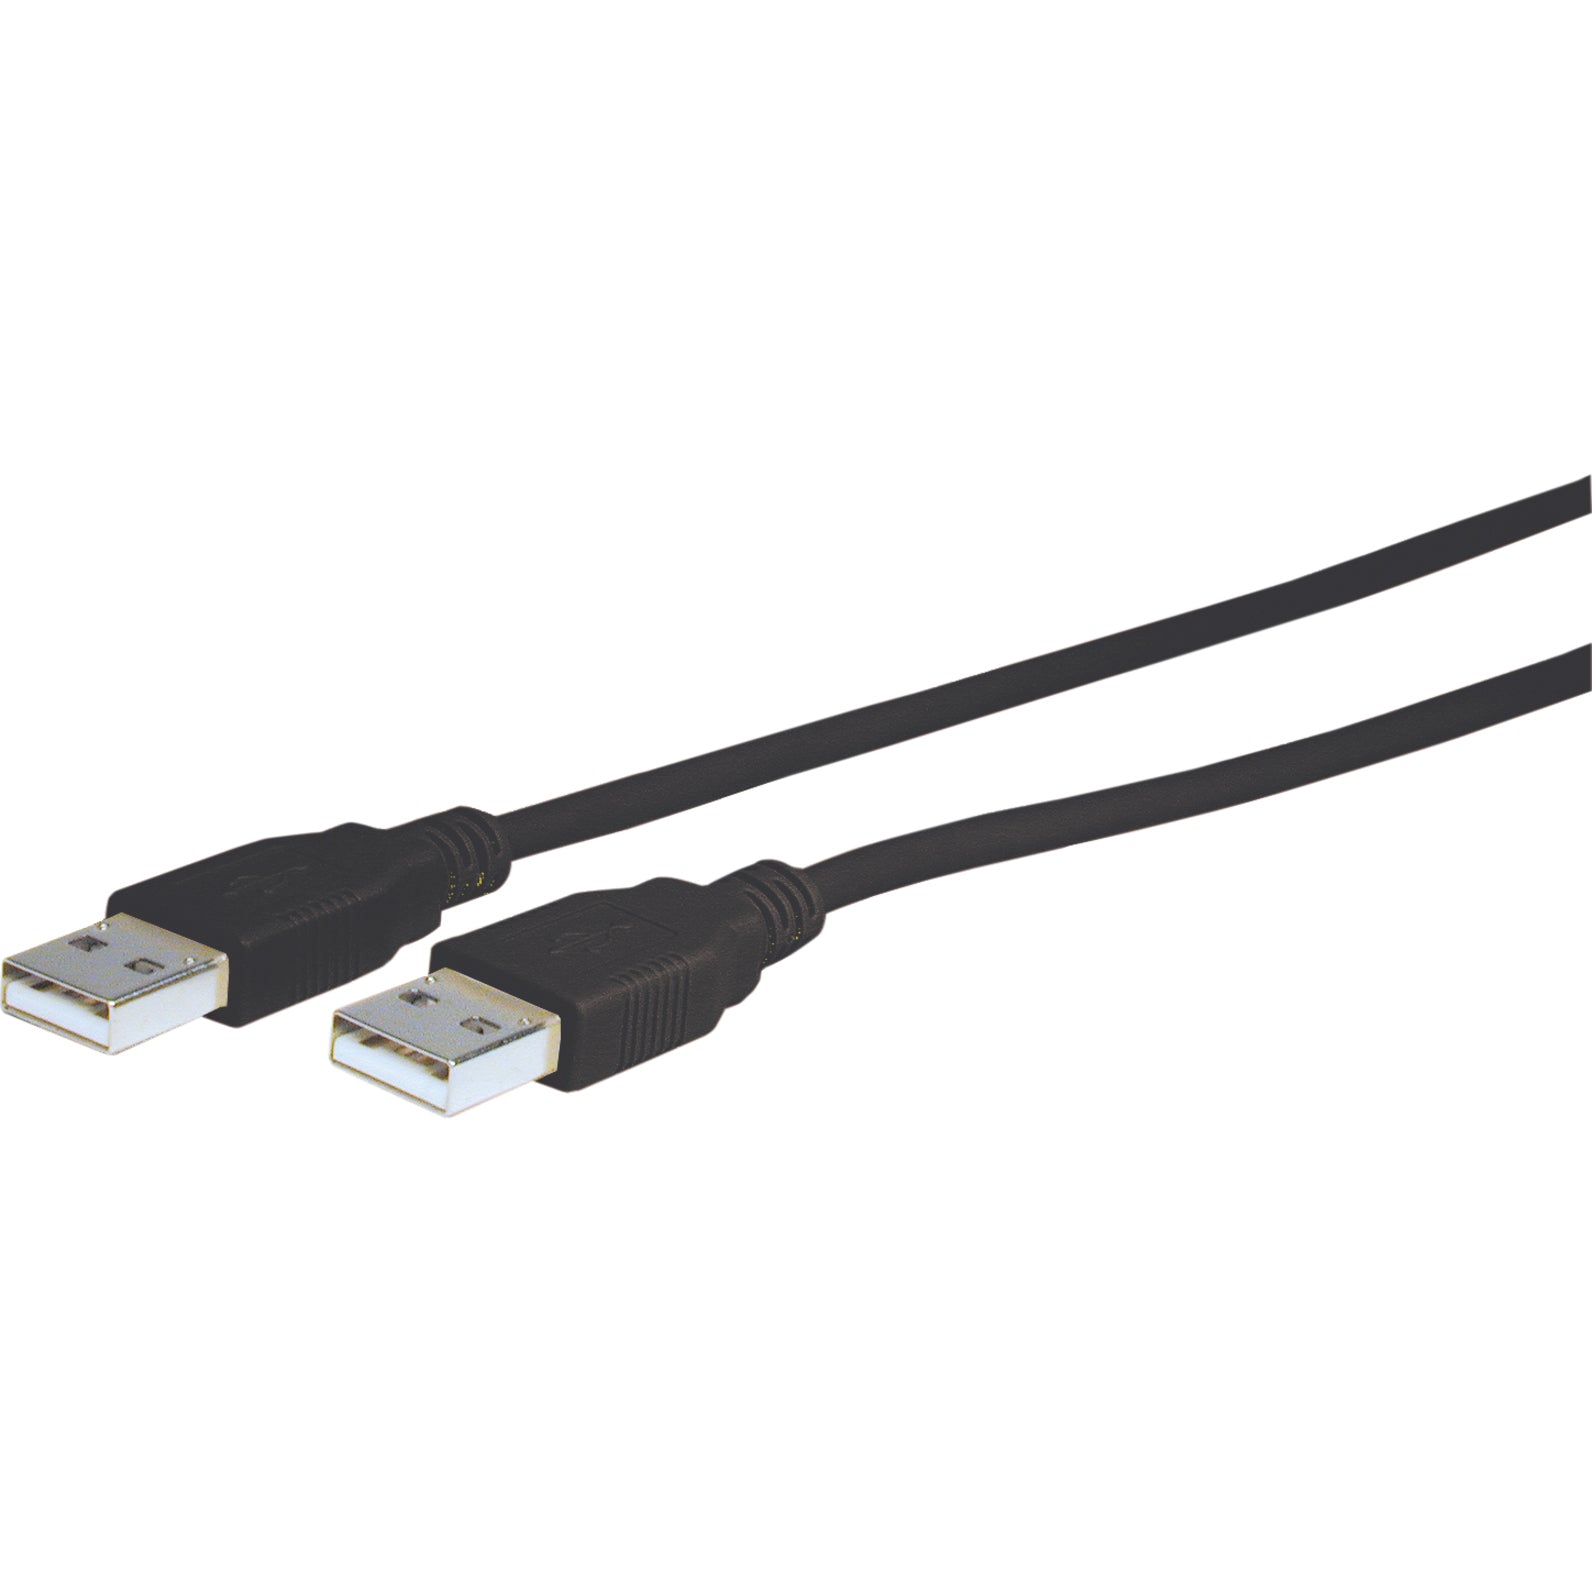 Comprehensive USB2AAMF3ST USB 2.0 A Male to A Female Cable 3ft, Strain Relief, Molded, 480 Mbit/s Data Transfer Rate